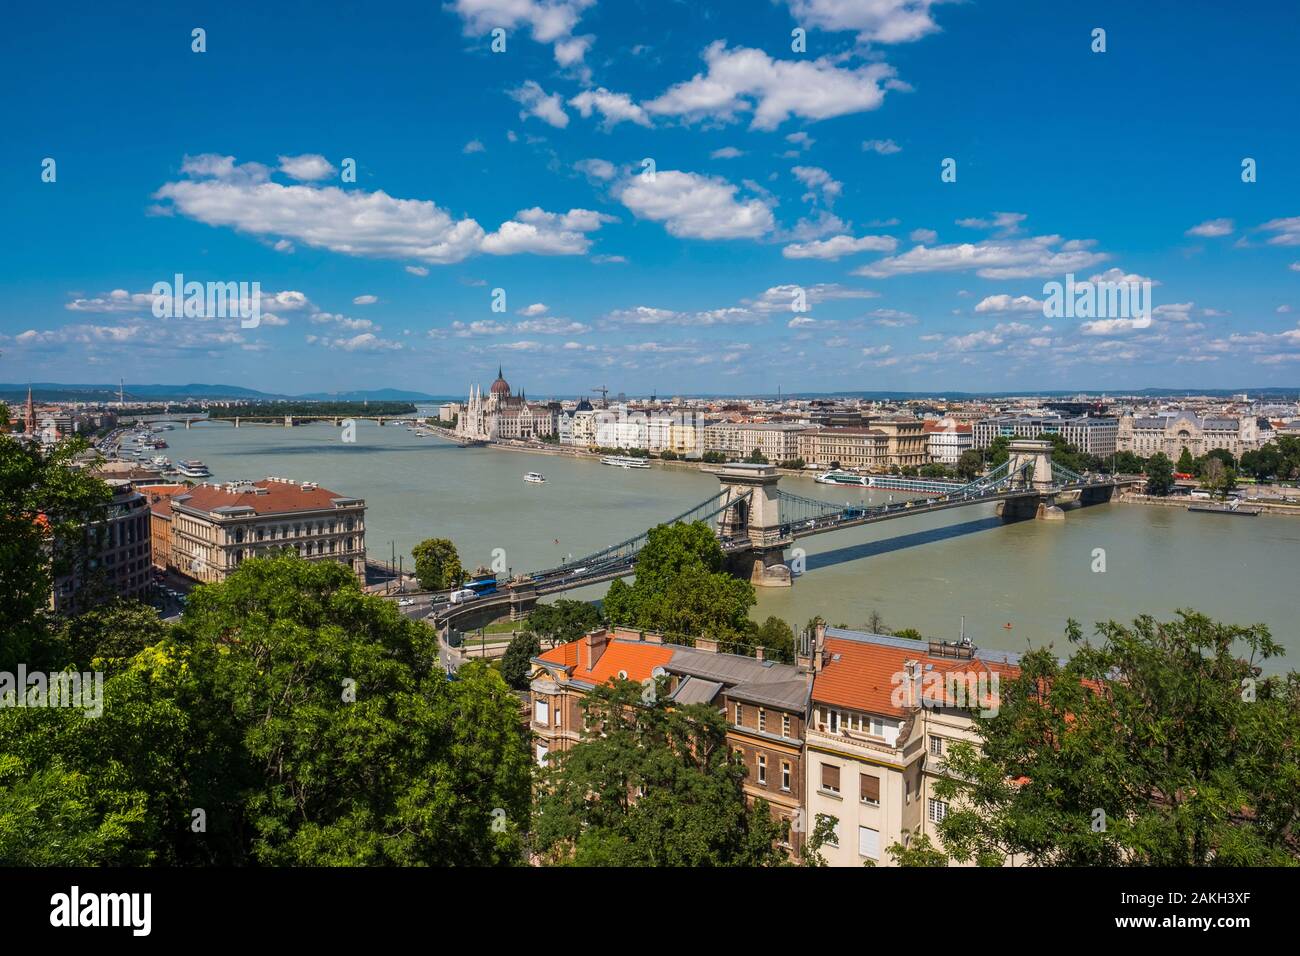 Hungary, Budapest, view of the Hungarian Parliament (UNESCO World Heritage Site) and the pest district Stock Photo